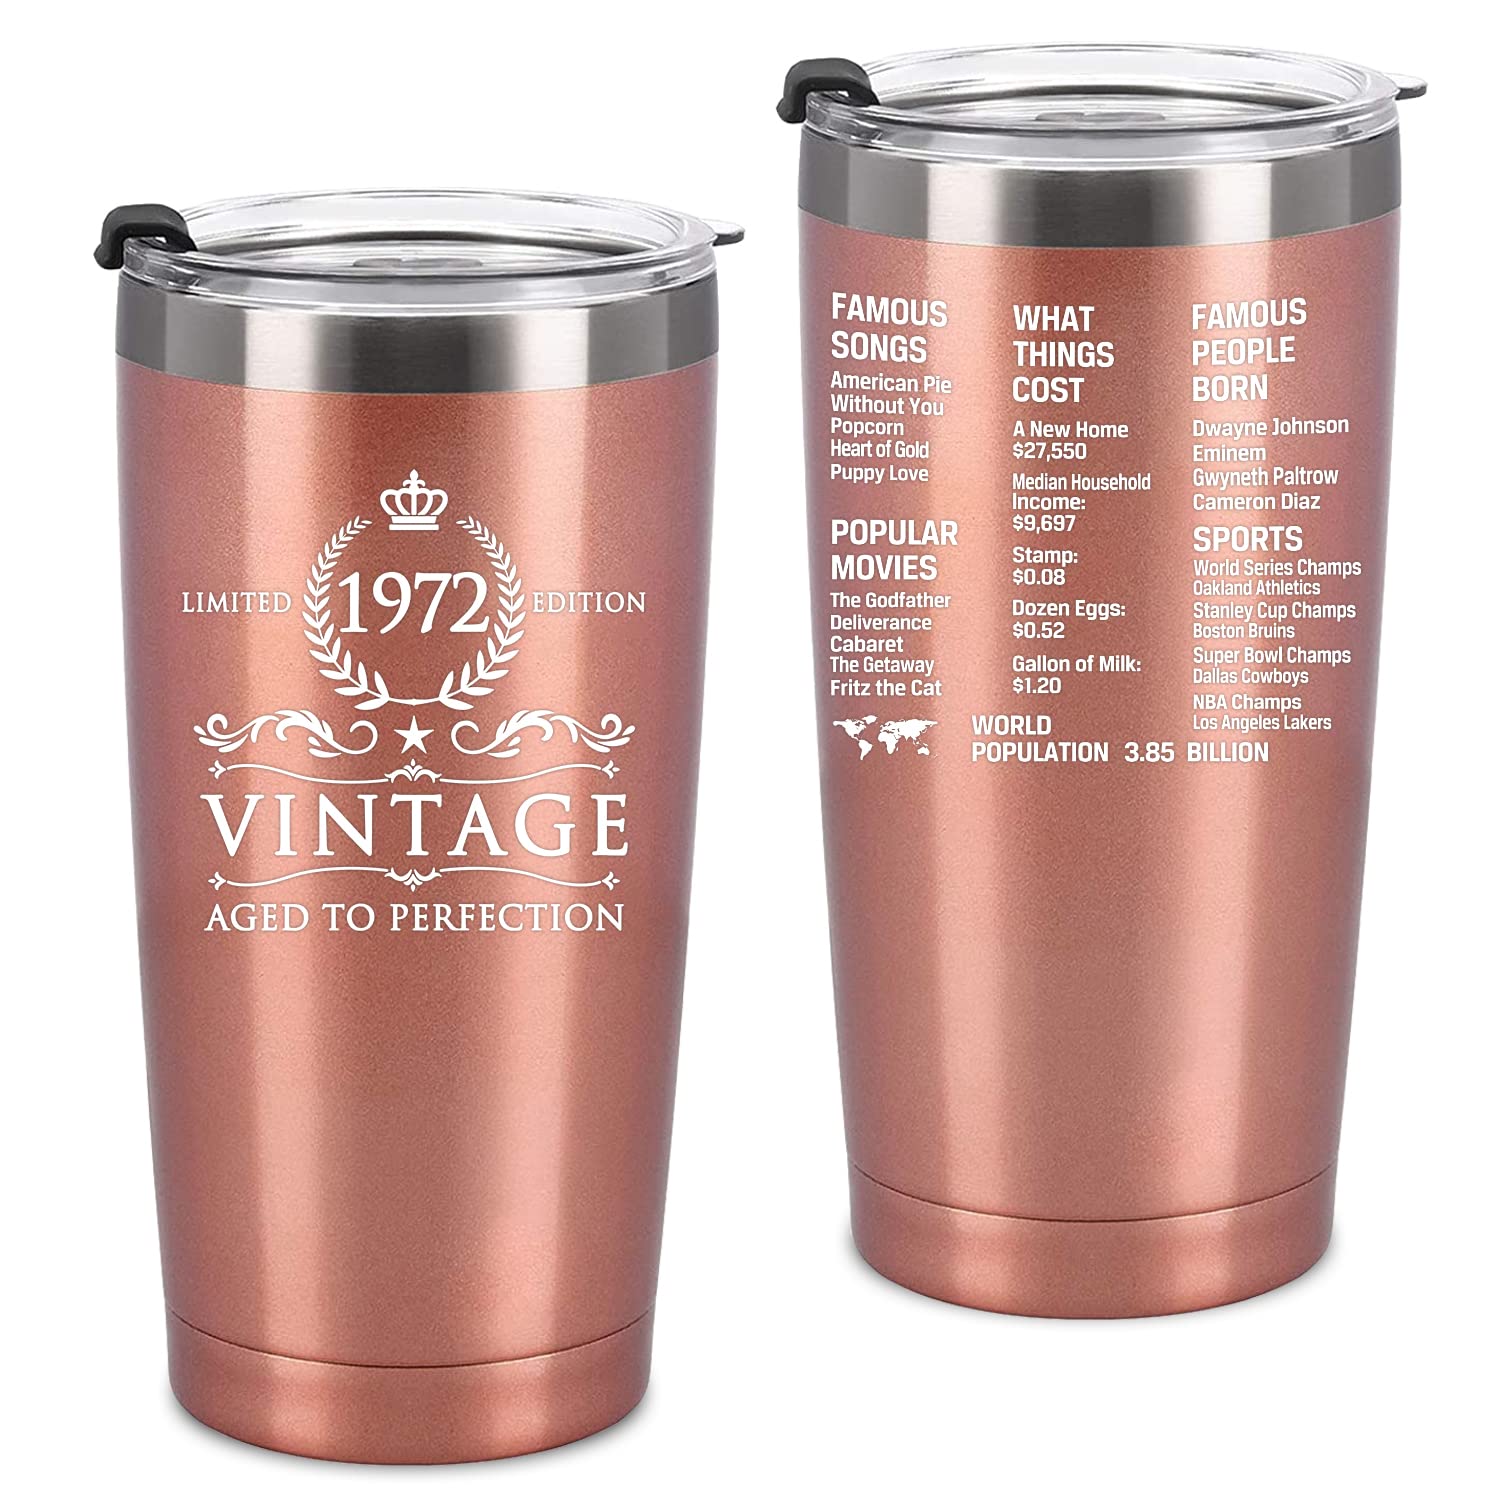 Greatingreat 1972 50th Birthday gift for Women and Men - 50th gifts for Parents - 50th class Reunion - Mom Dad Wife Husband Present - 20oz Tu